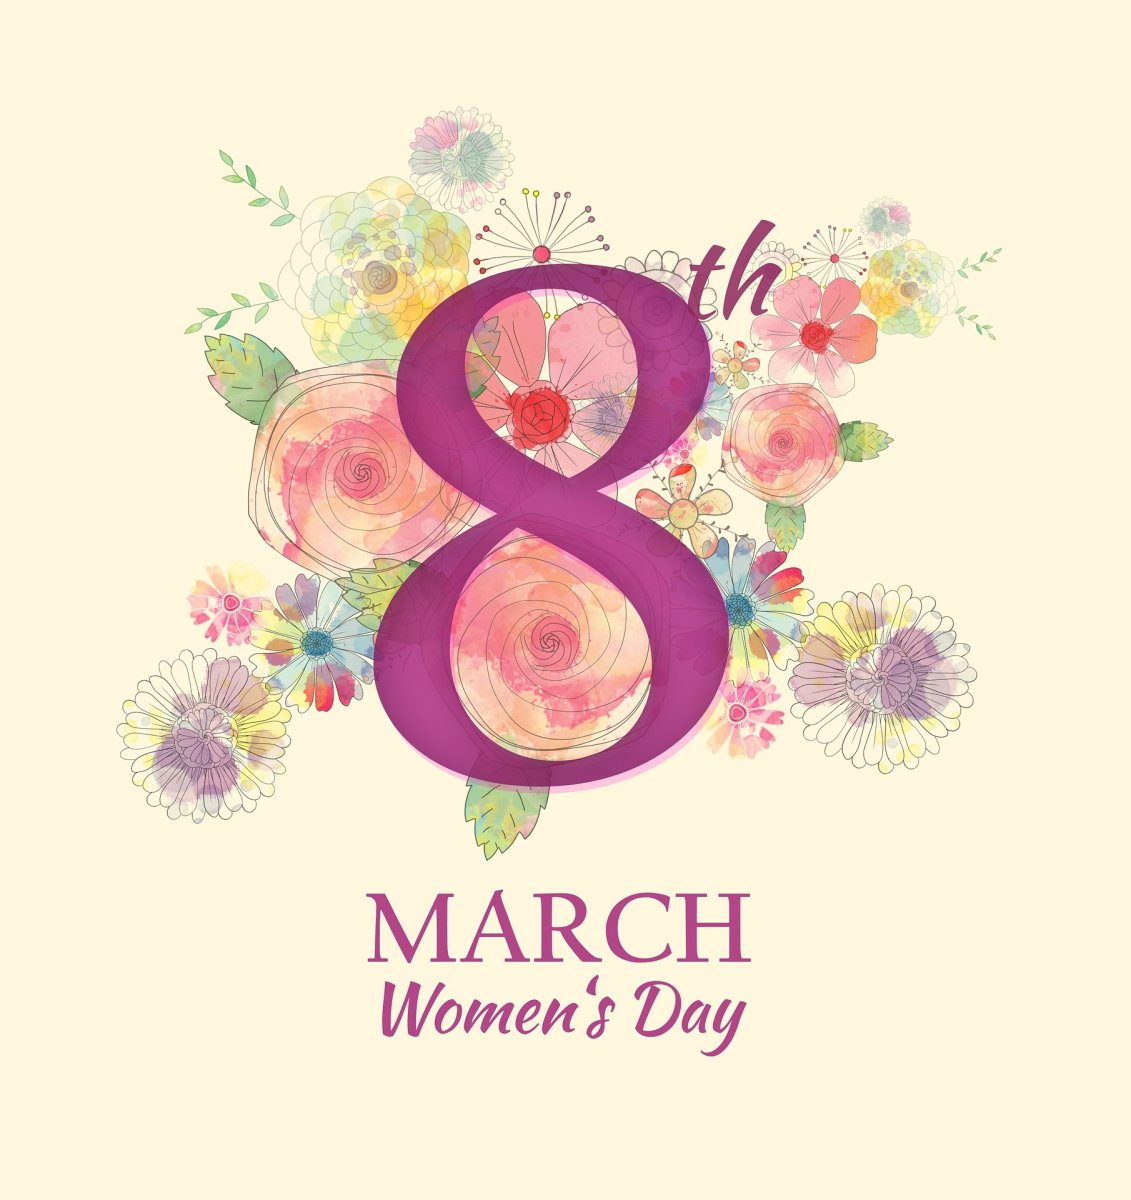 A card celebrating March 8 as International Women’s Day.